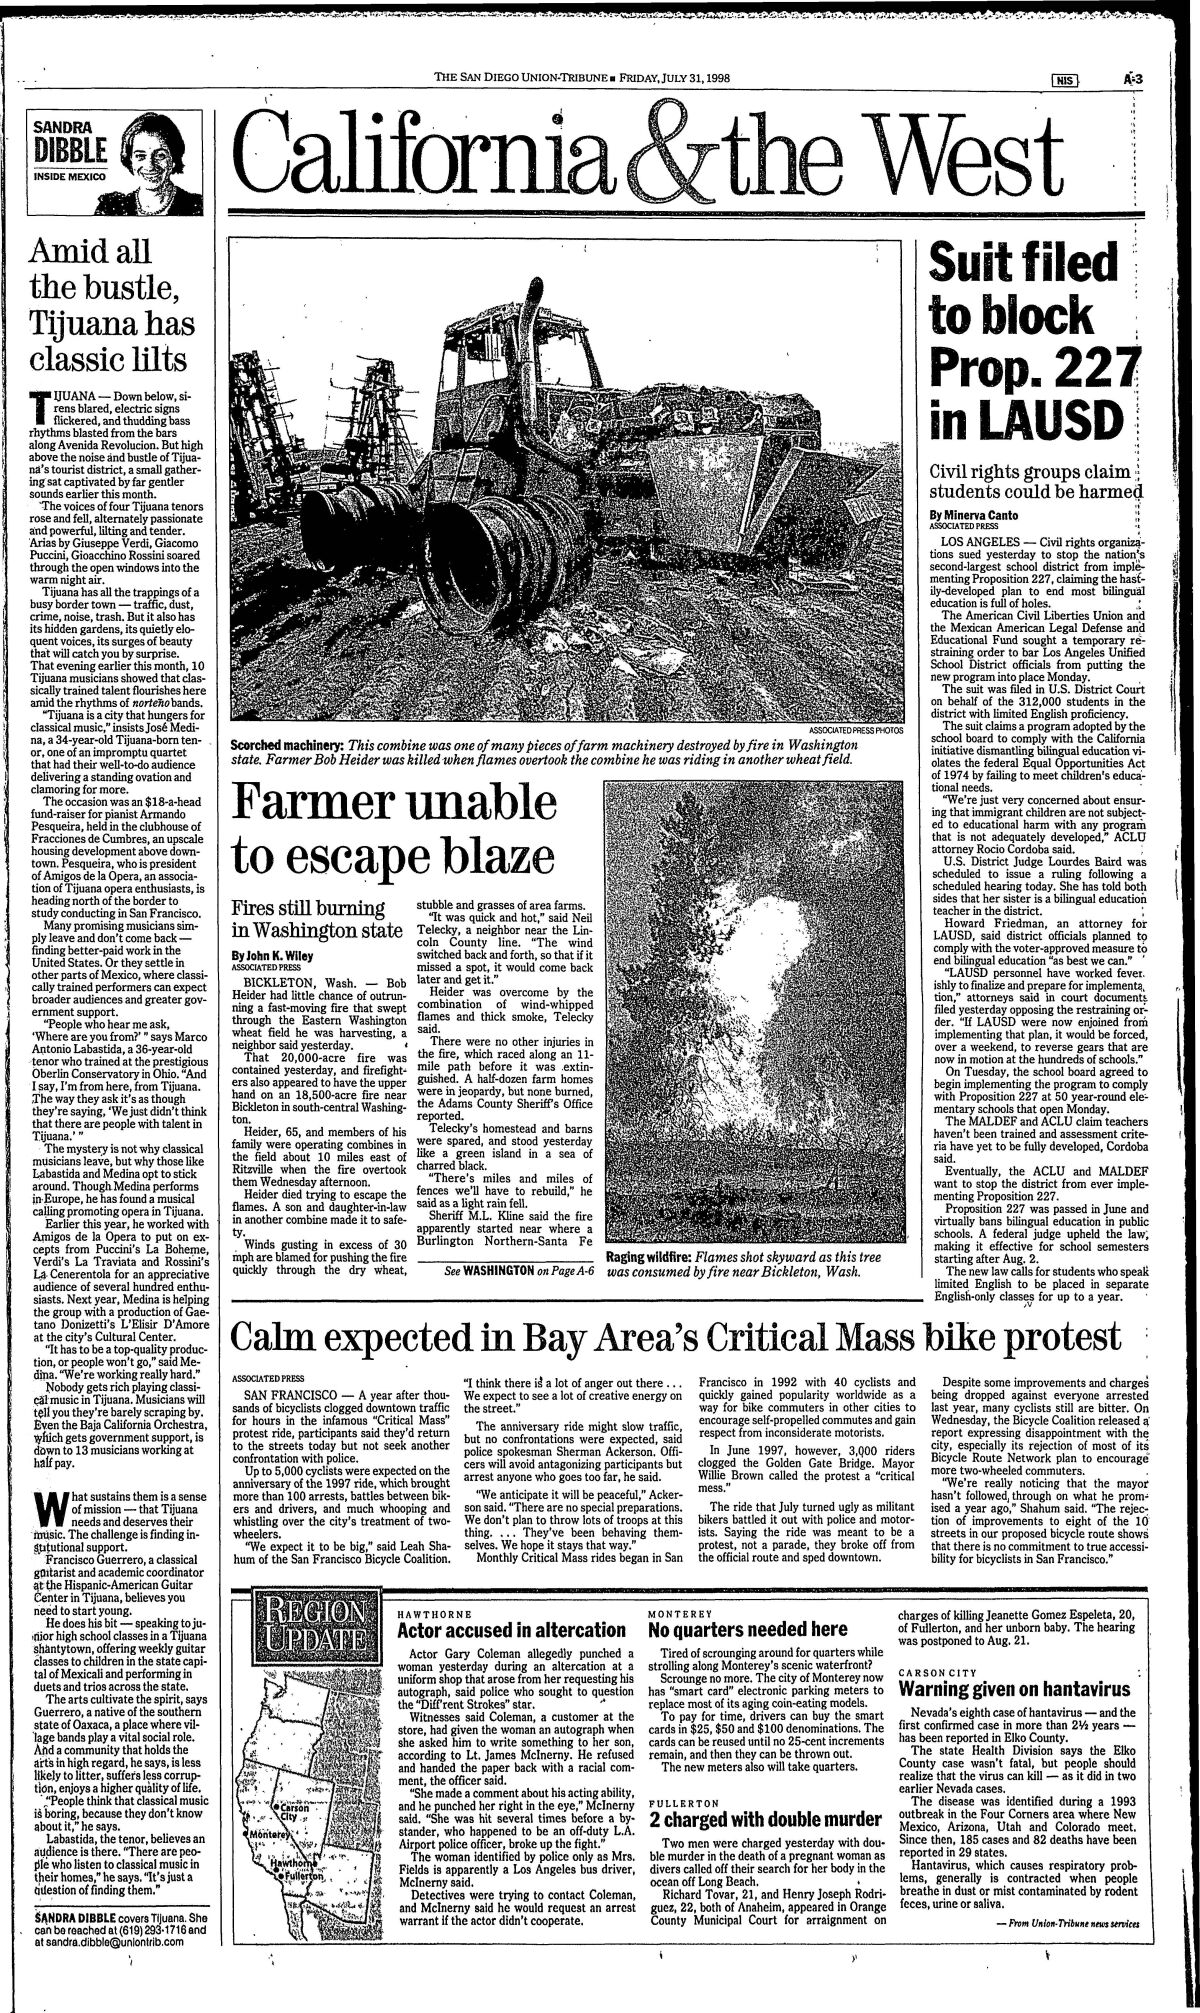 "Amid all the bustle, Tijuana has classic lilts," by Sandra Dibble, published in The San Diego Union-Tribune, July 31, 1998.